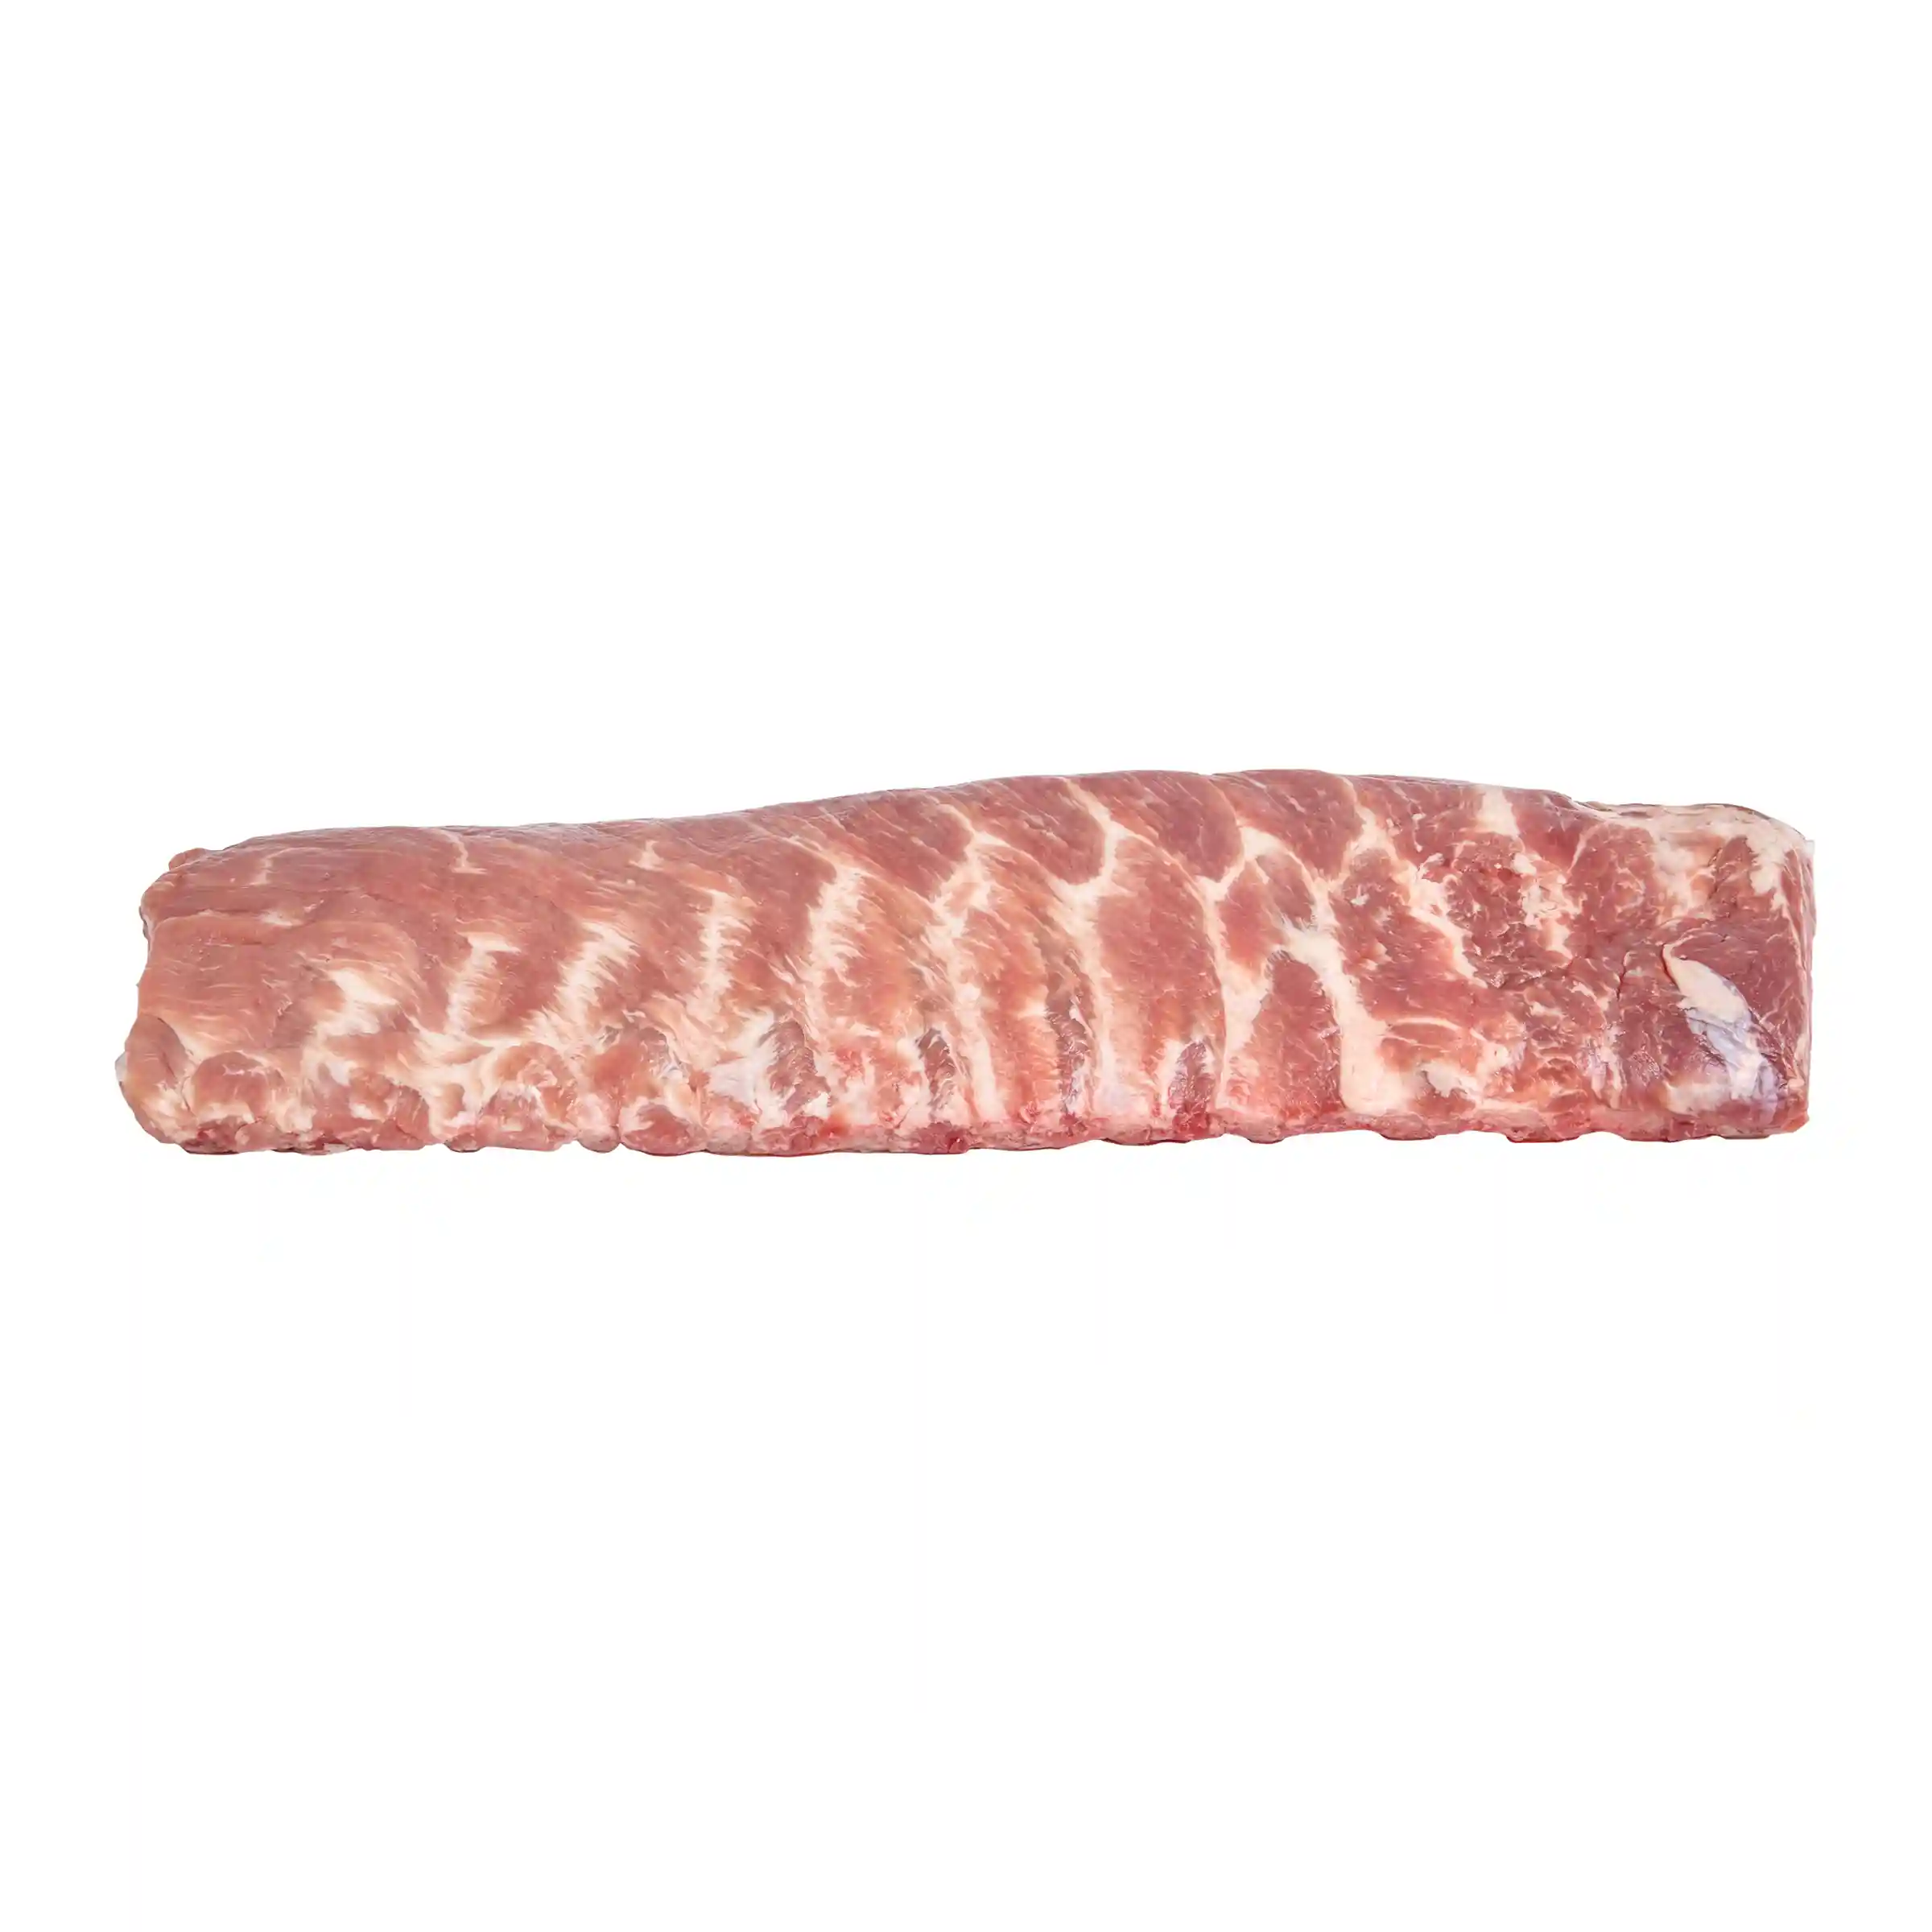 ibp Trusted Excellence® Brand St. Louis Style Ribs, 2.75 - 3.1 lbs_image_11